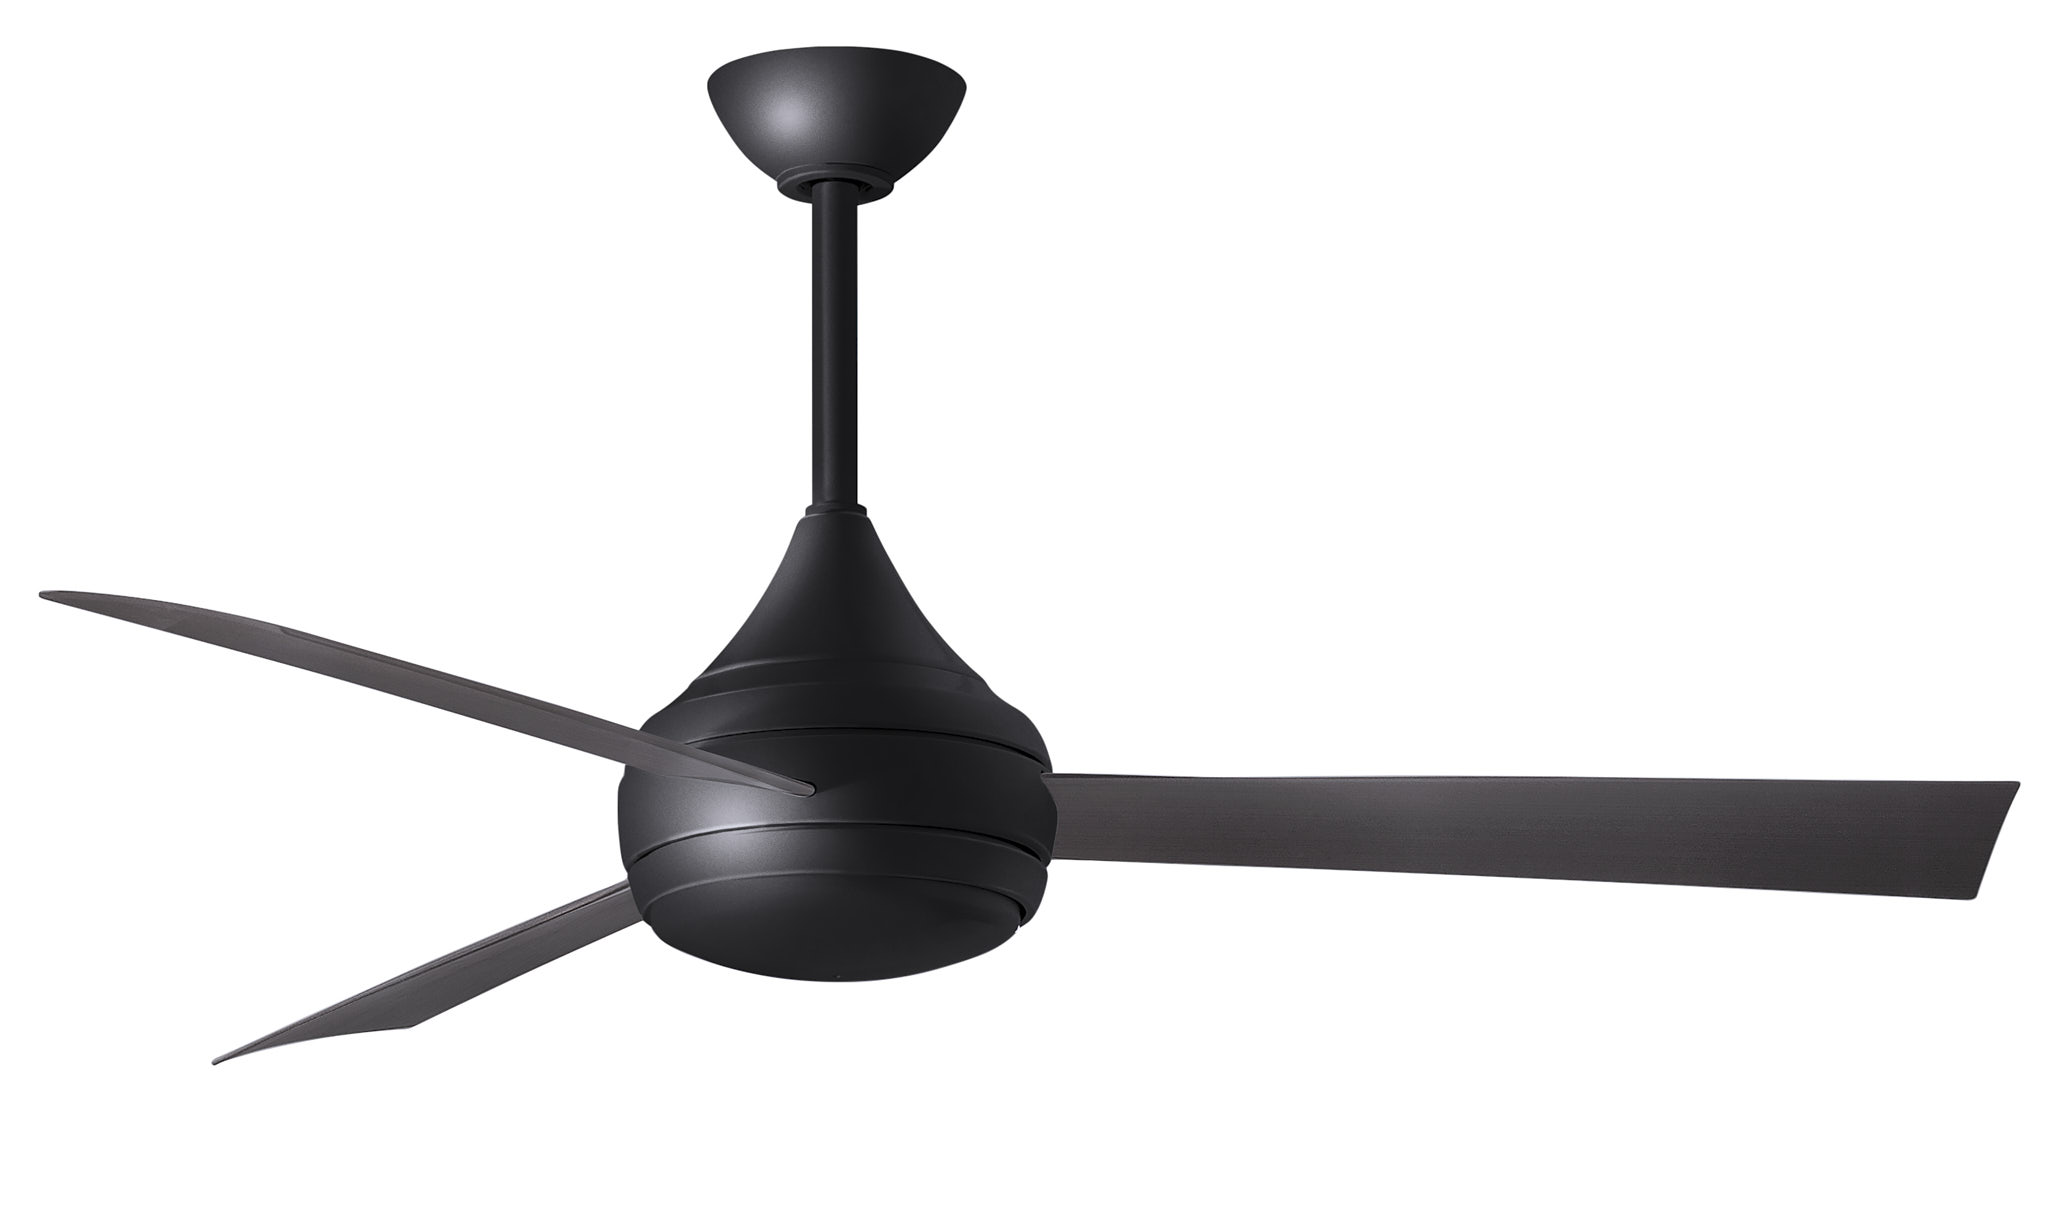 Donaire ceiling fan in Matte Black with Brushed Bronze blades with light cap manufactured by Matthews Fan Company.